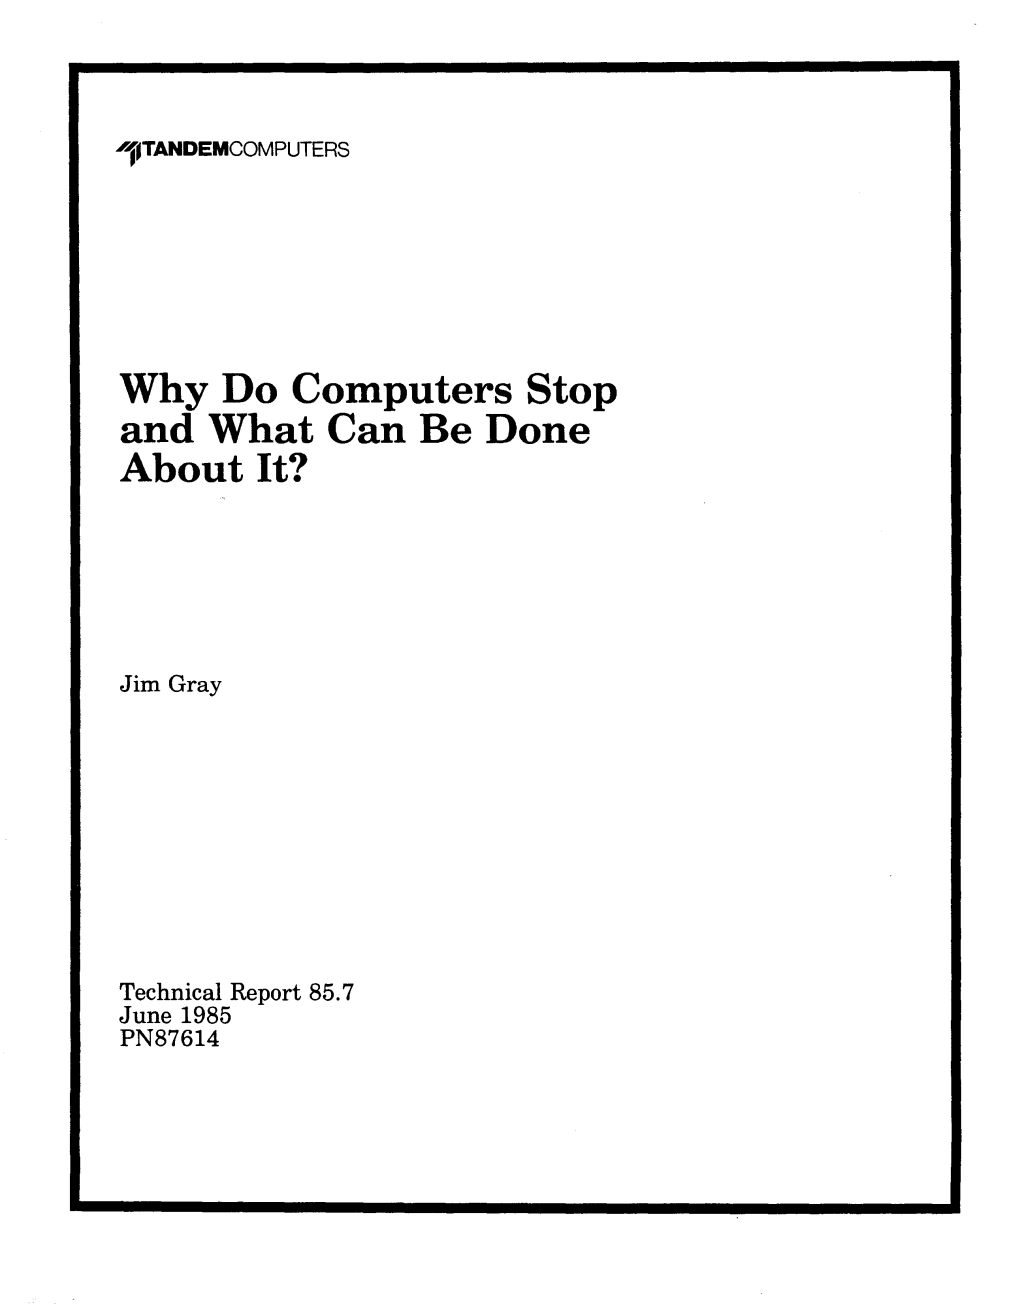 Why Do Computers Stop and What Can Be Done About It?